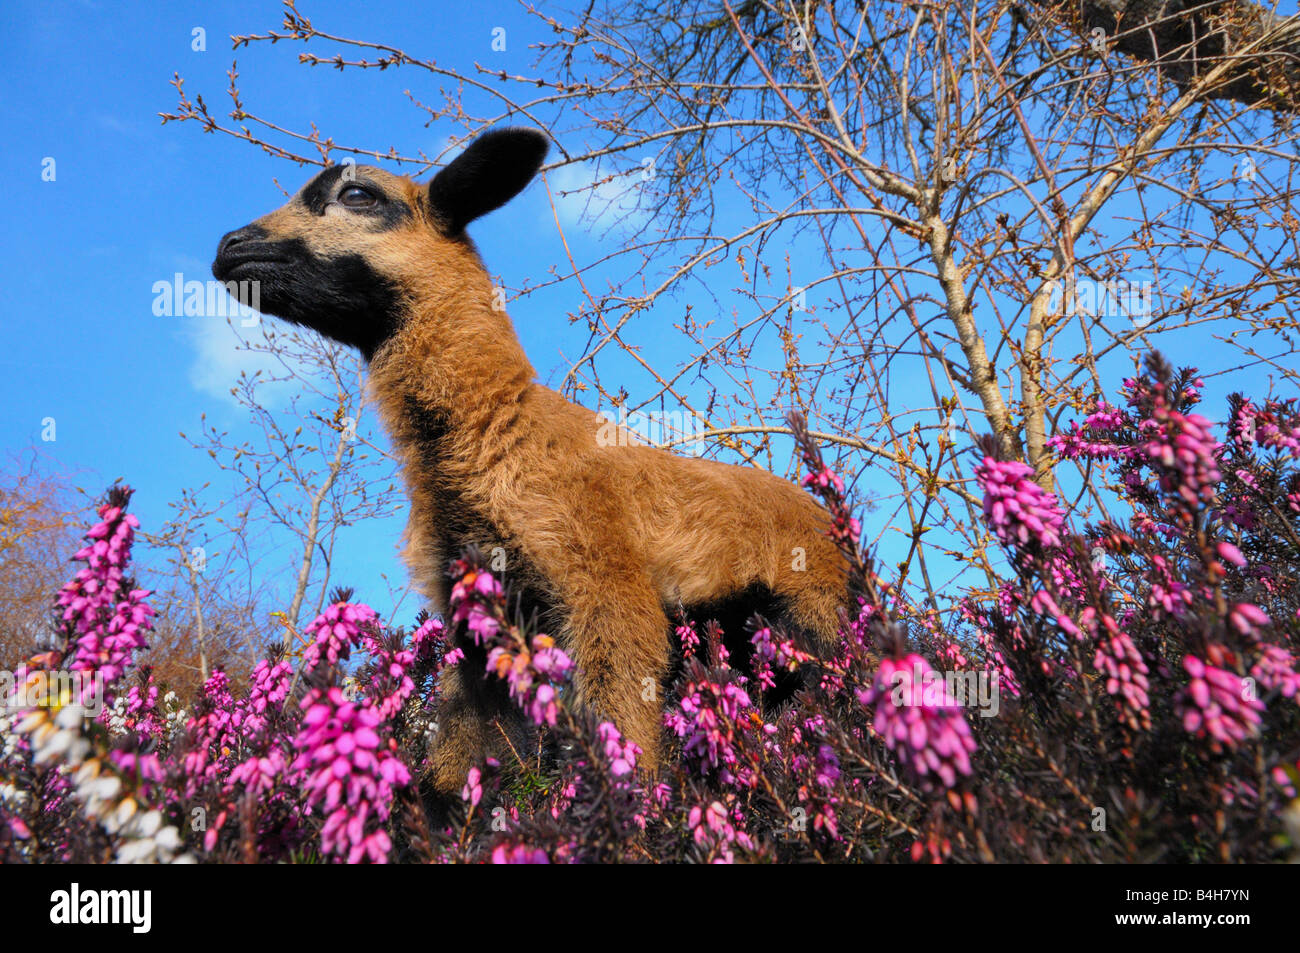 Low angle view of kid goat standing in Heather Erica Herbacea (Erica carnea) field Stock Photo